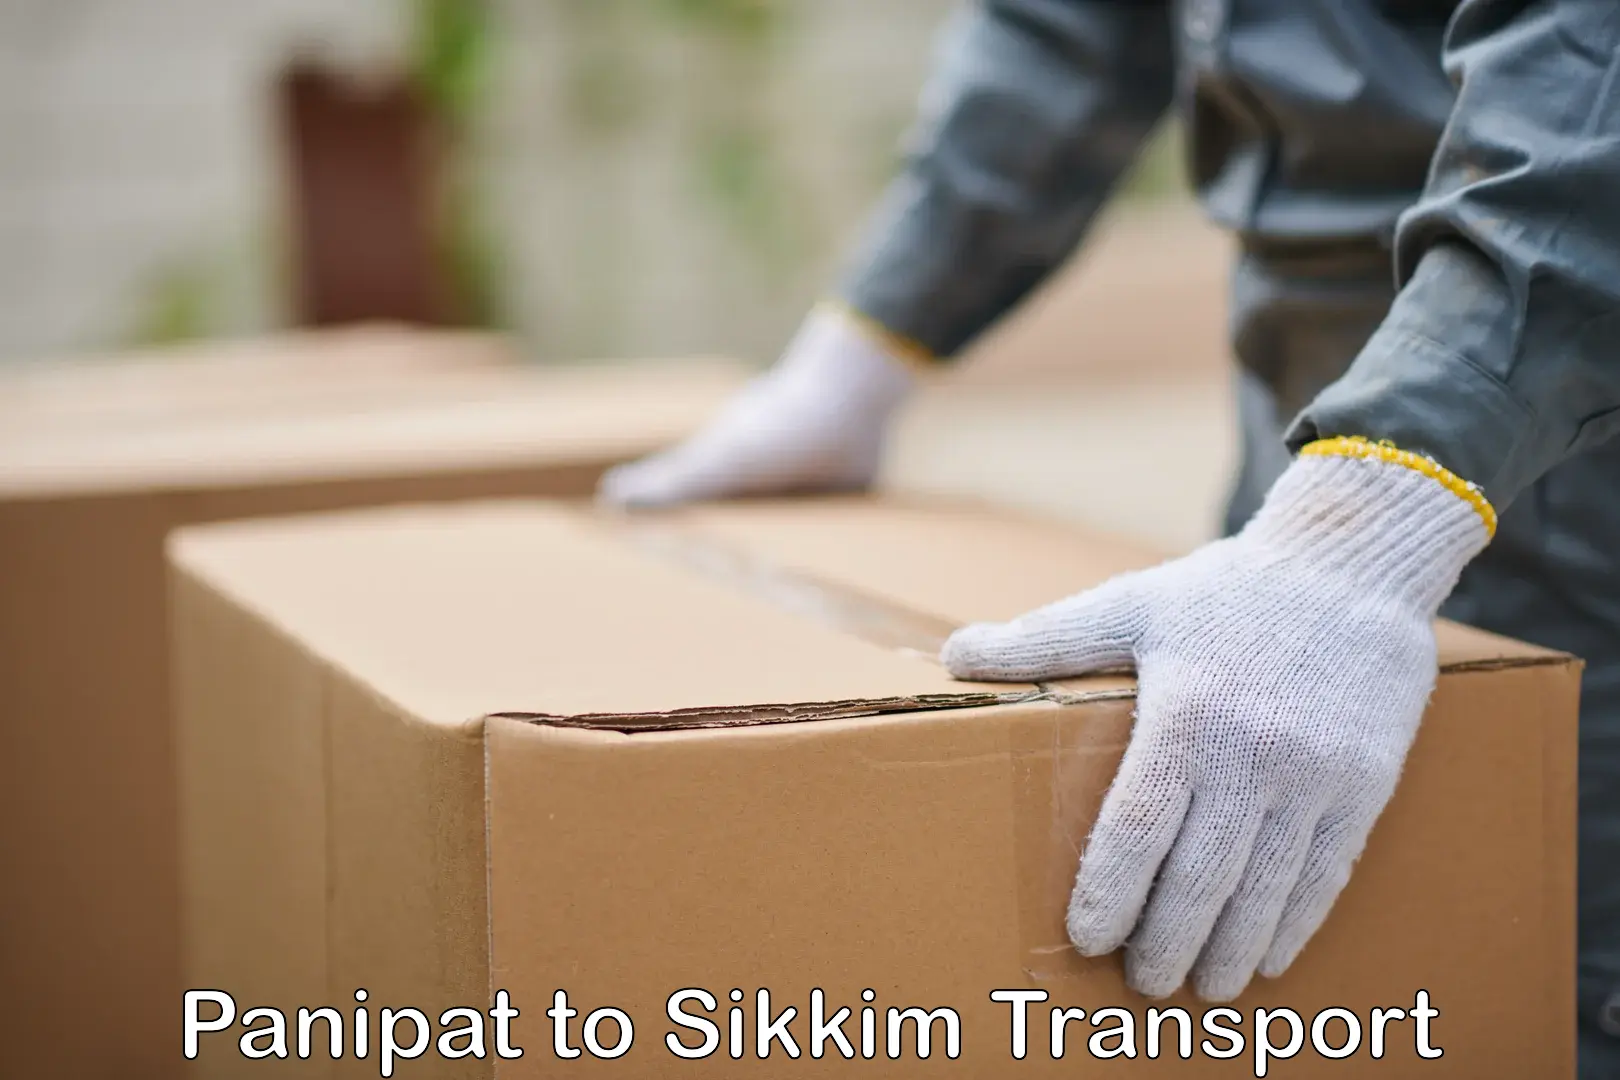 Commercial transport service Panipat to Geyzing